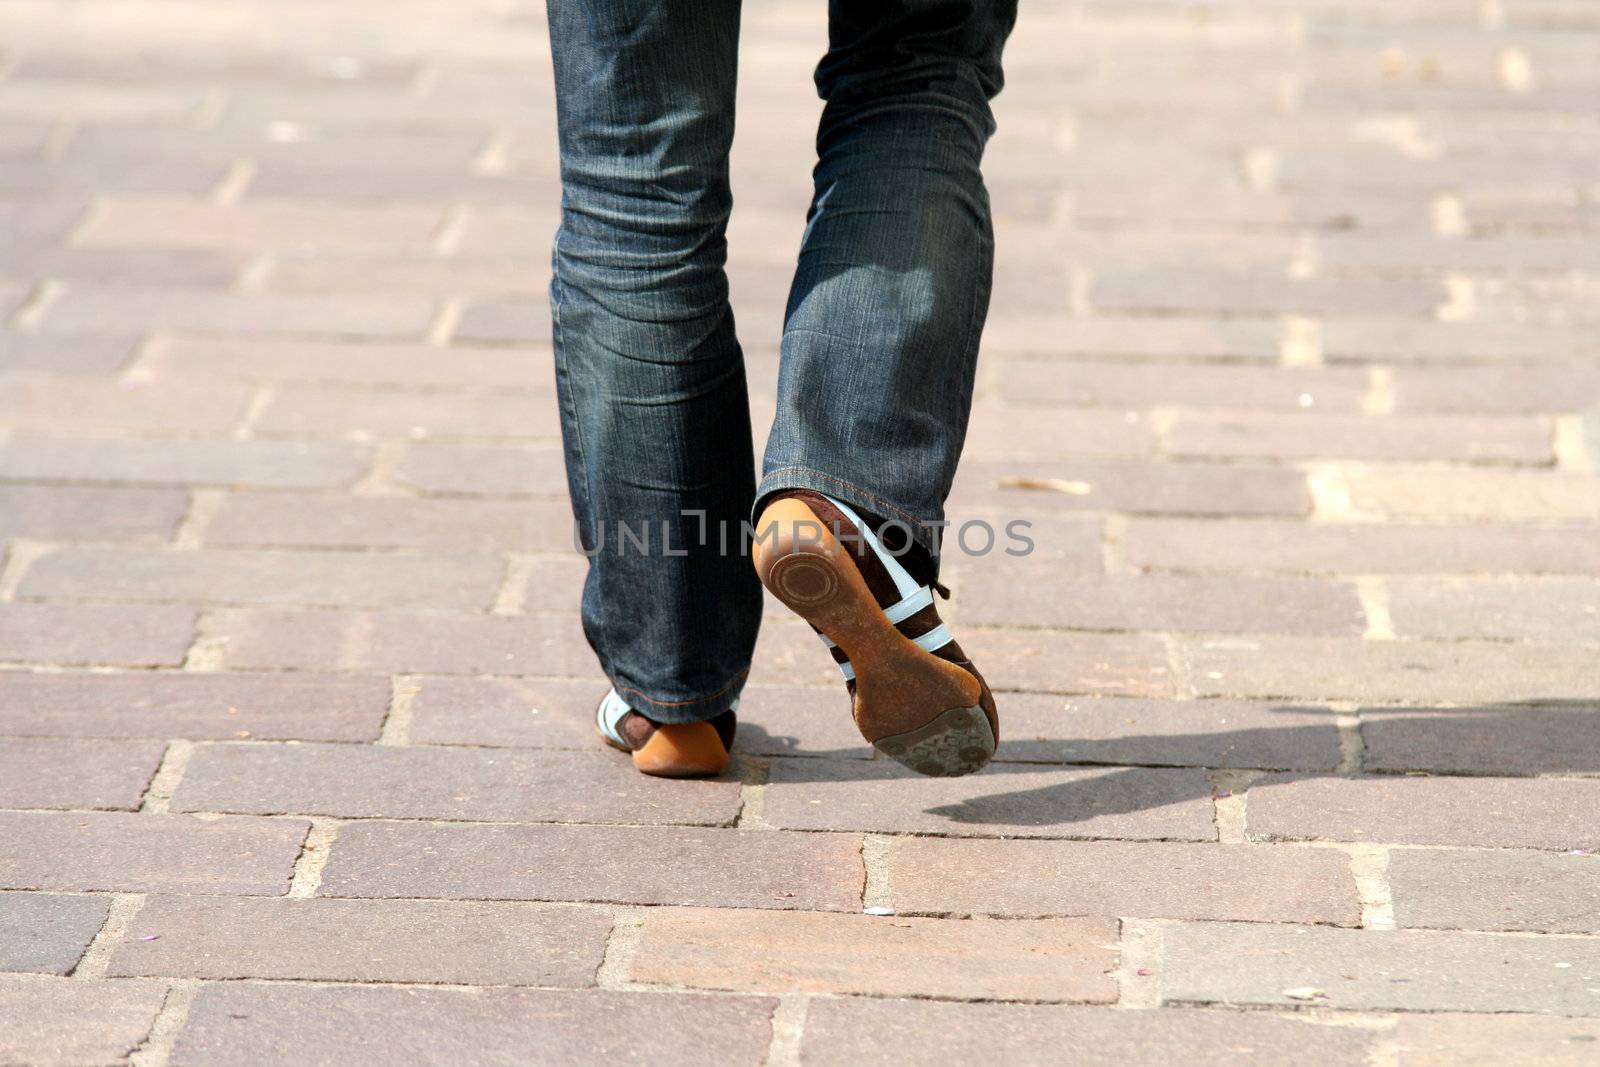 Human legs with blue jeans and shoes